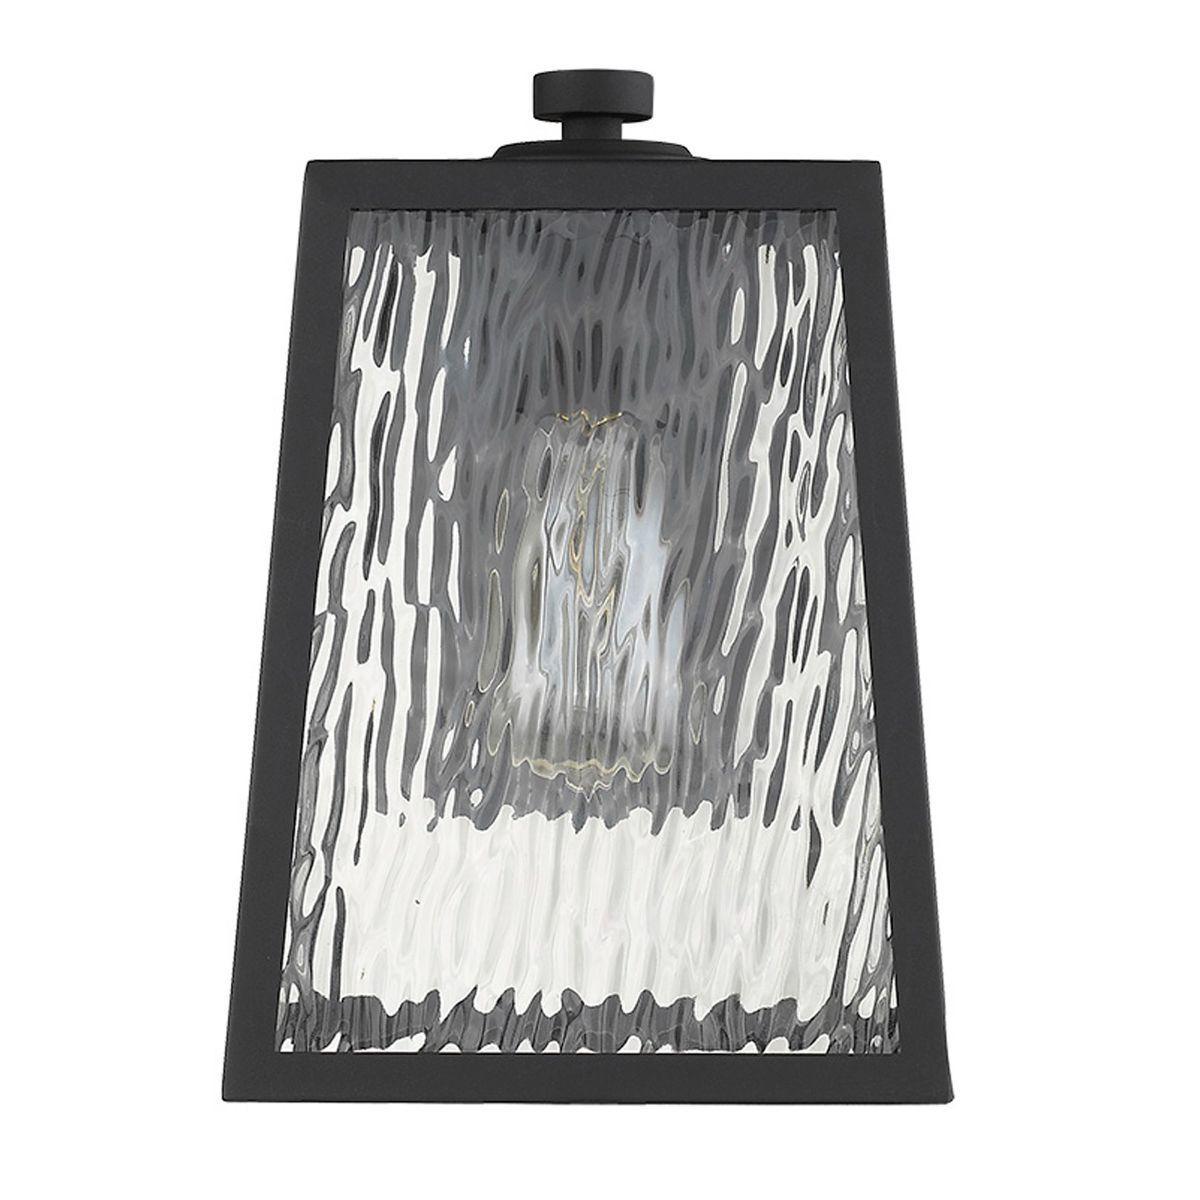 Hirche 13 In. Outdoor Wall Light Black Finish